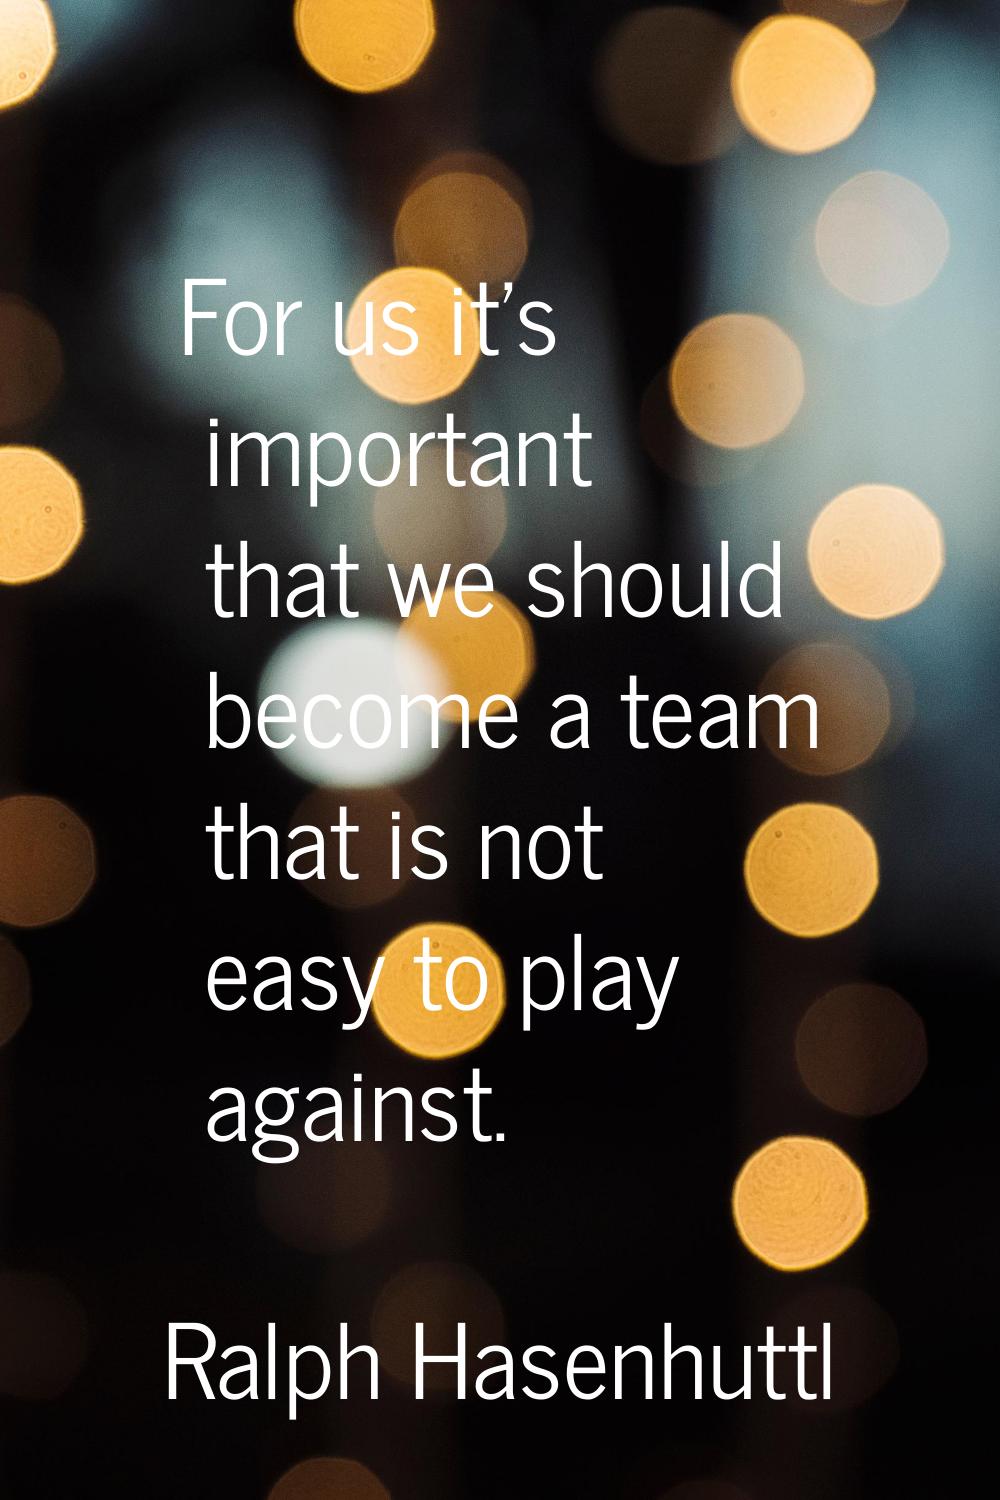 For us it's important that we should become a team that is not easy to play against.